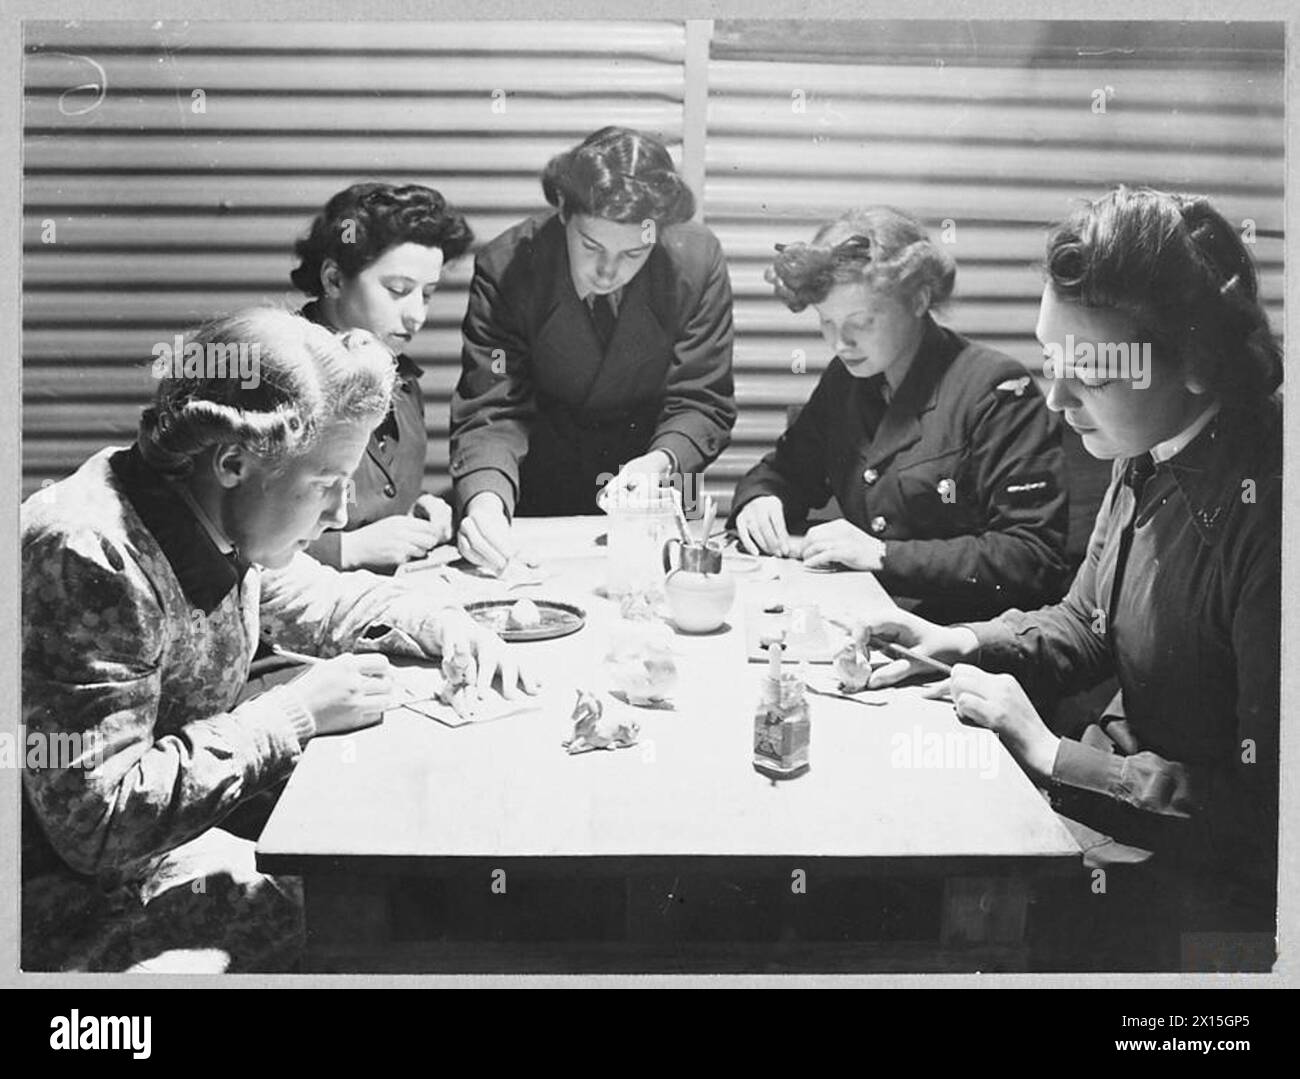 W.A.A.F. IN SCOTLAND : - 12188 Picture (issued 1944) shows - W.A.A.F. making clay models for the exhibition. Left to right - Section Officer Joan Cartright of Brighton; Corporal C.M.Wilson of Selkirk, Section Officer Helen Thornton of Edinburgh - the instructor [standing]; Leading Aircraftwoman Pennycock of Edinburgh, and Leading Aircraftwoman L.Phillip of Edinburgh Royal Air Force Stock Photo